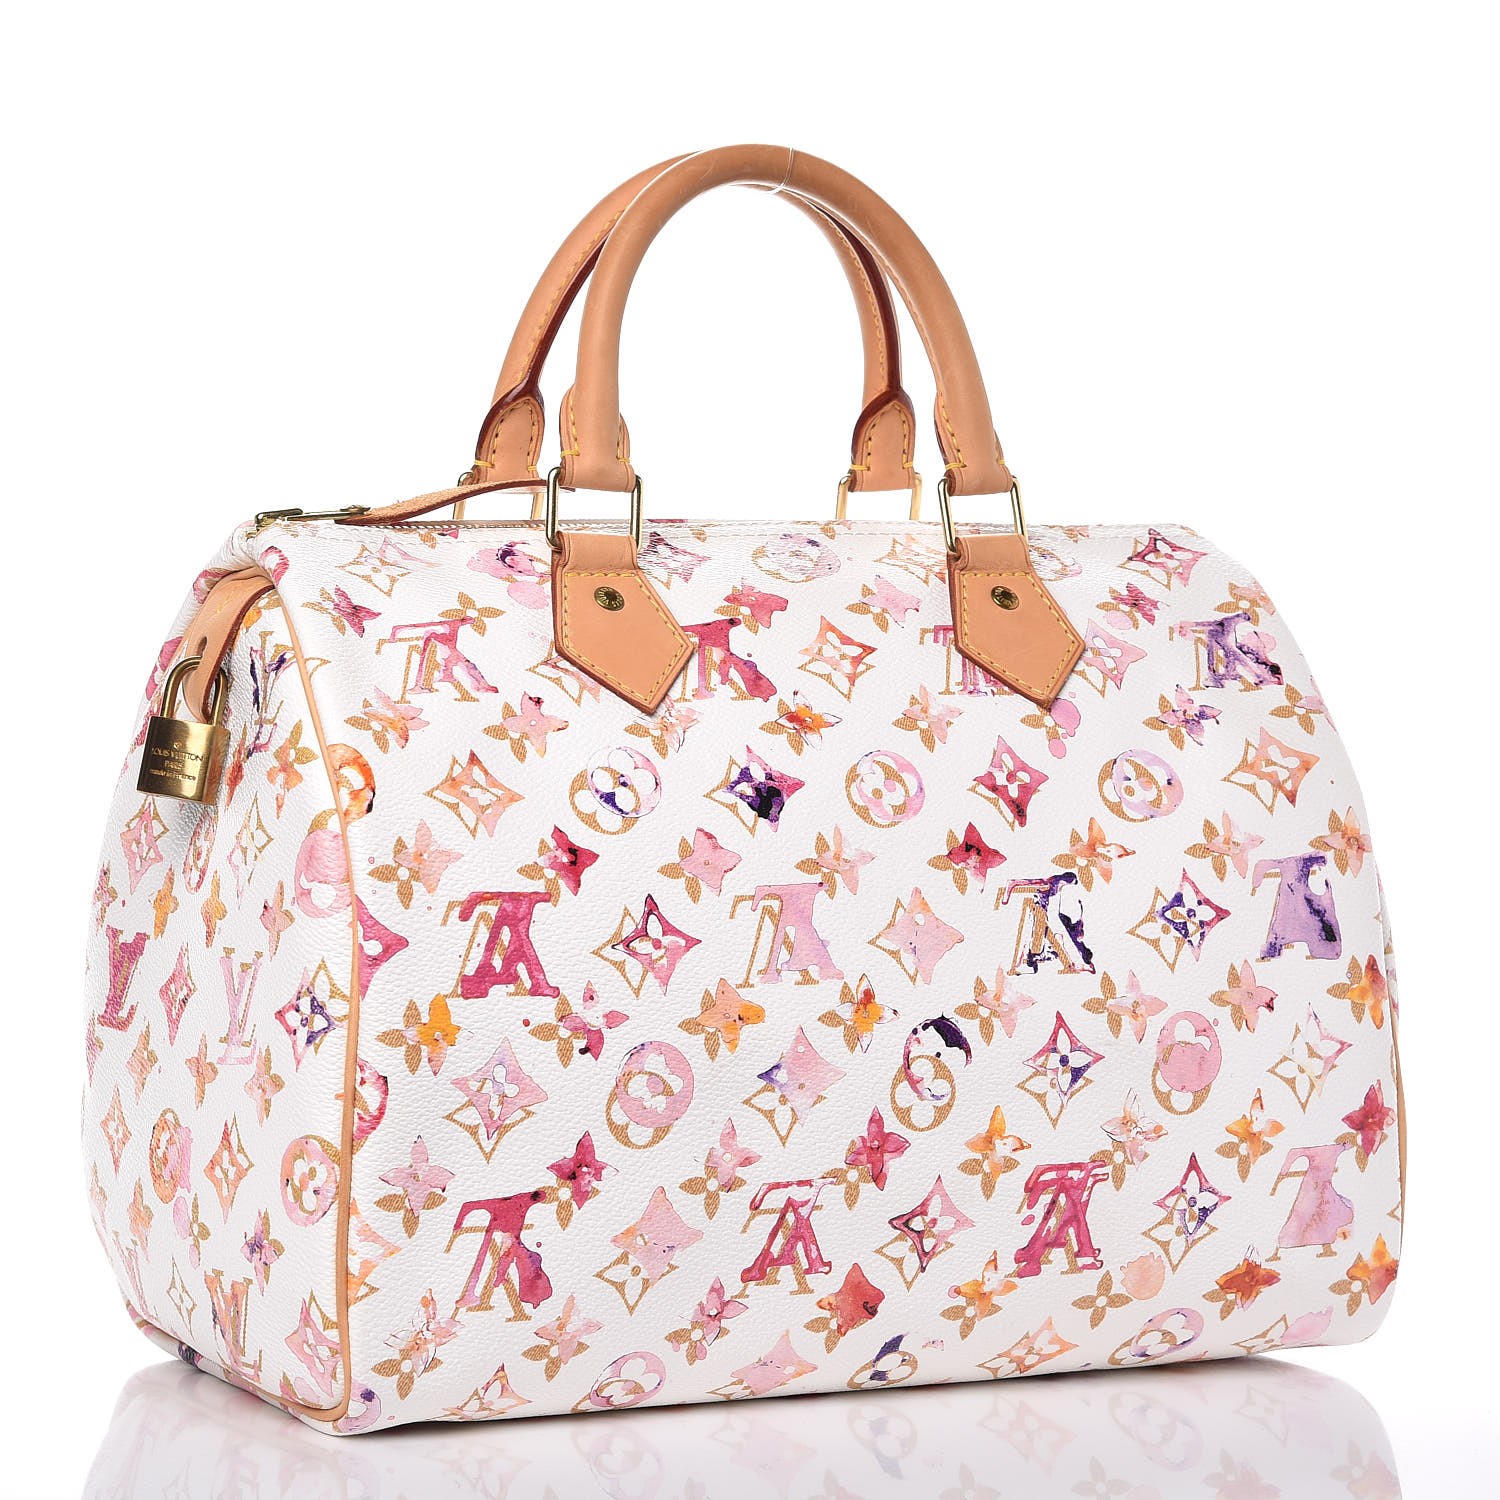 How To Clean White Lv Bag  Natural Resource Department